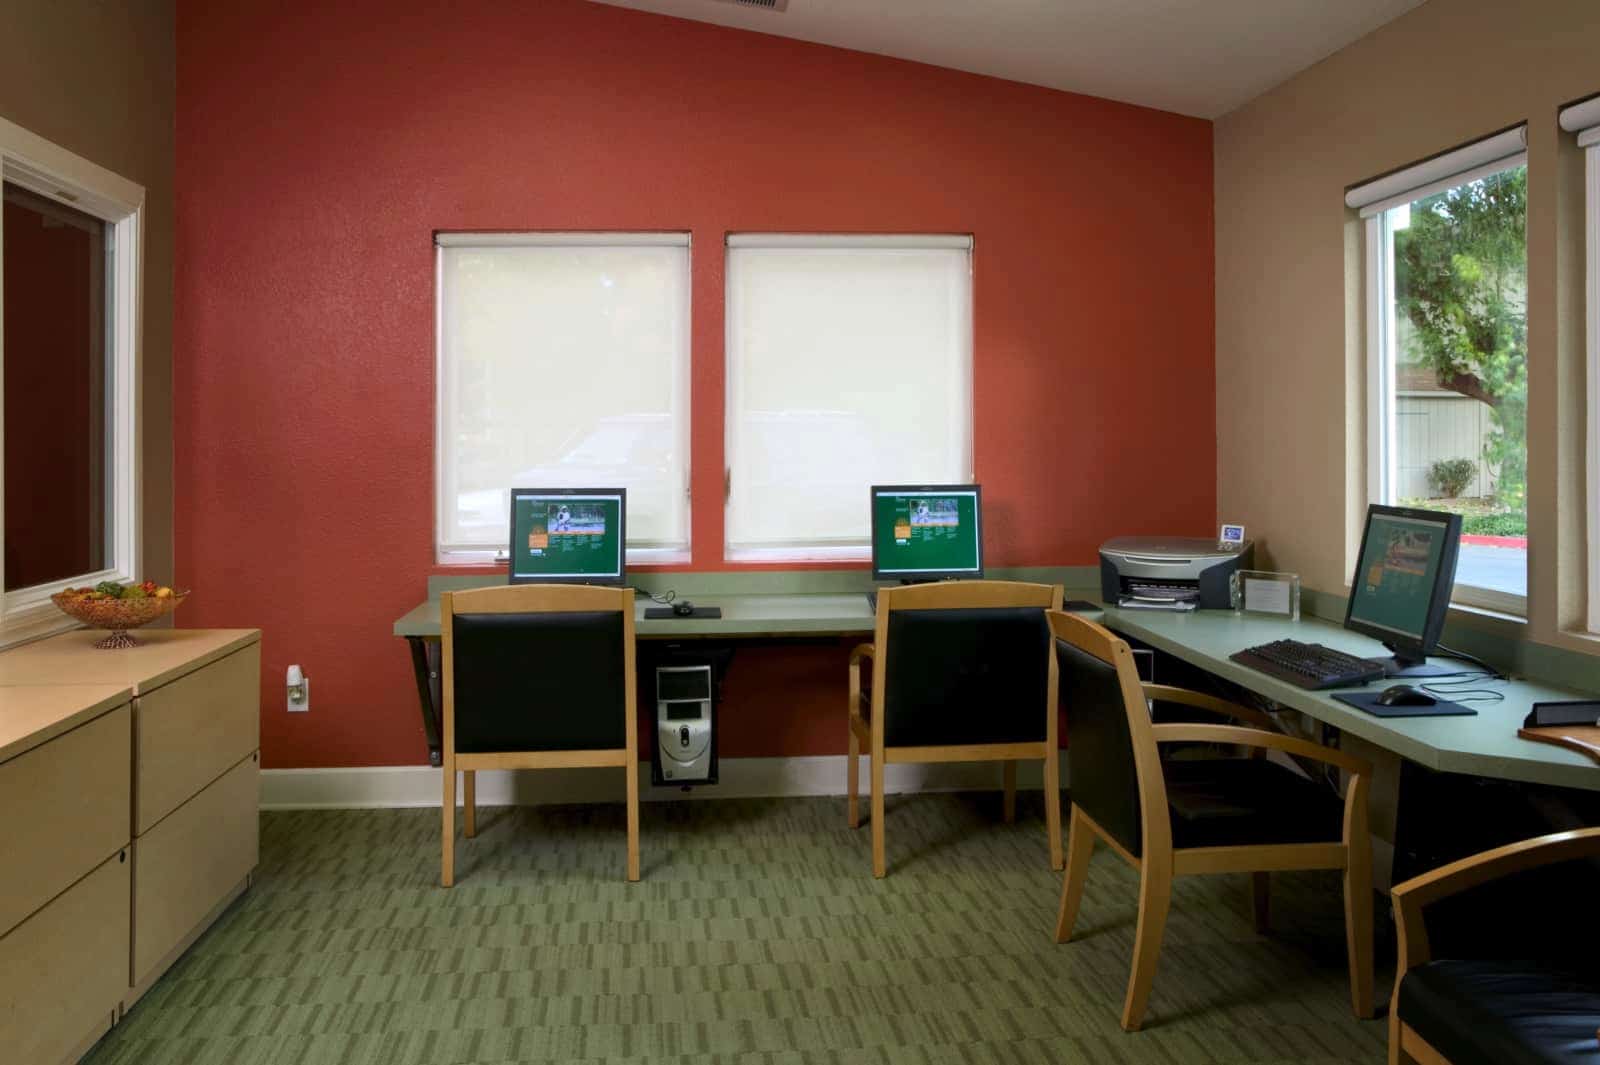 View of 3 computer stations and a printer in a business center.